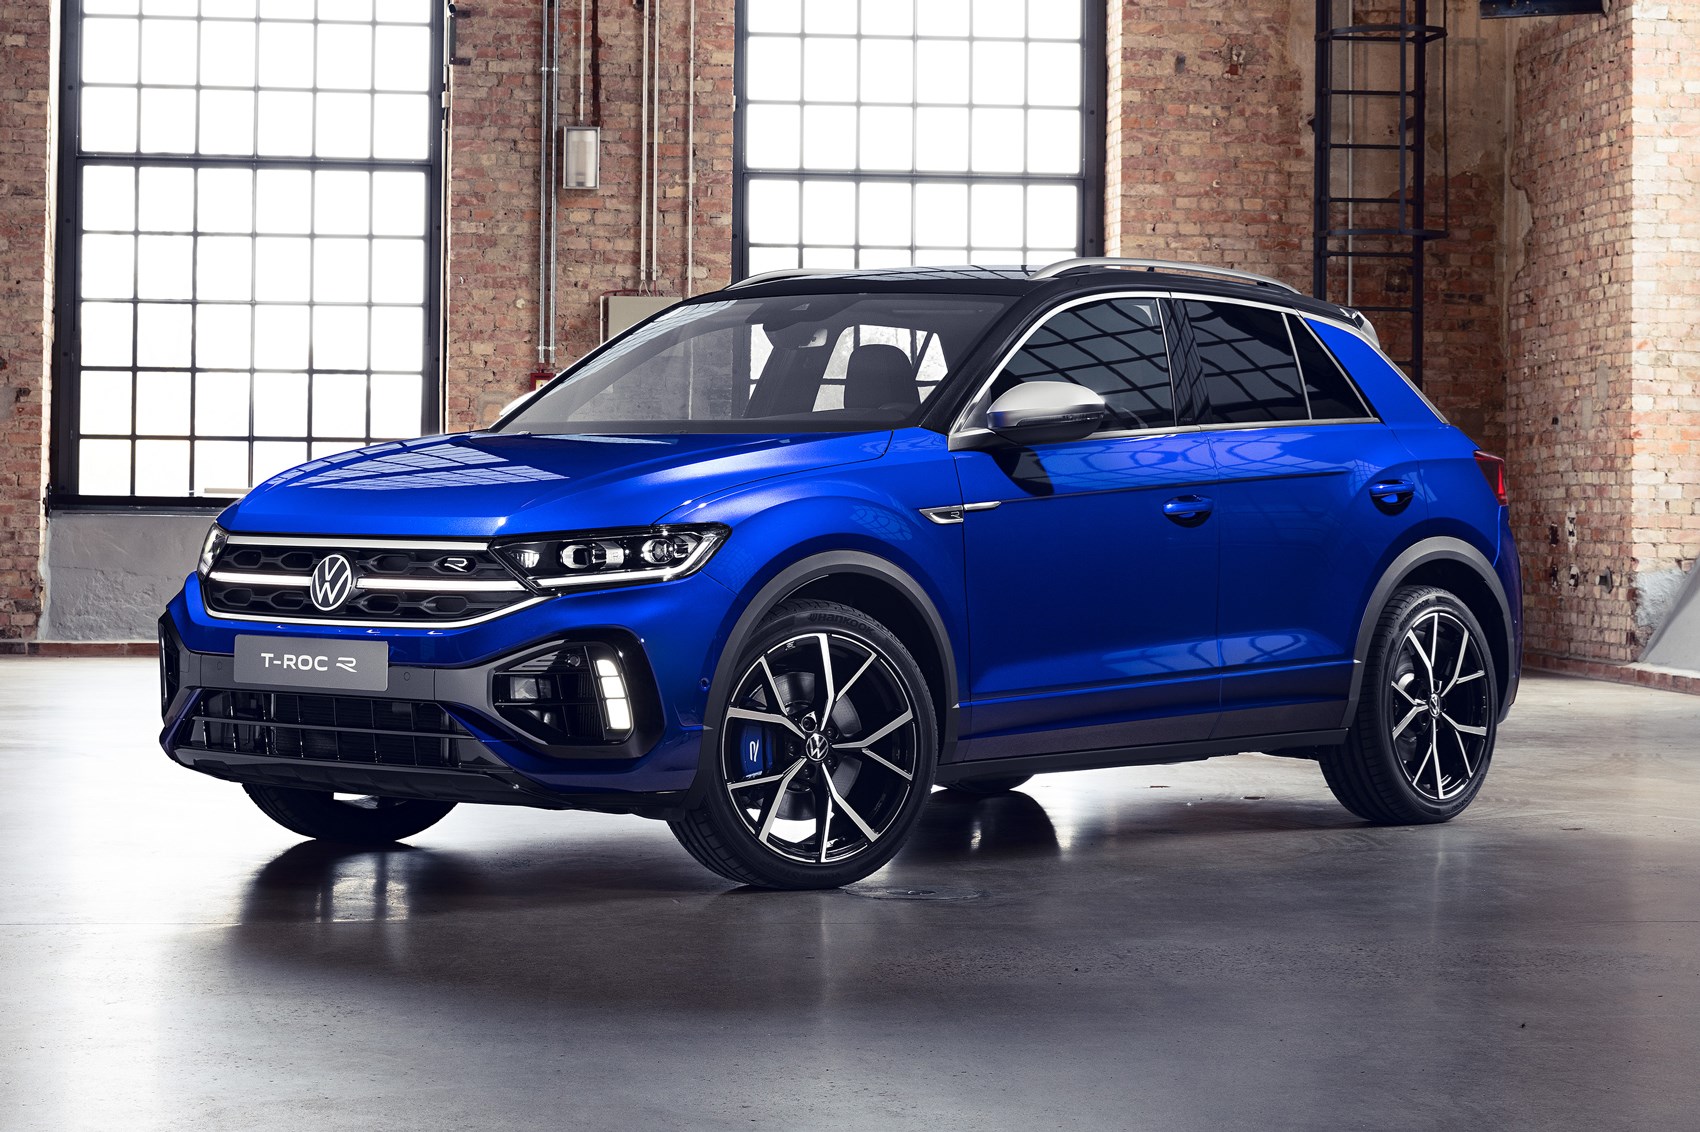 VW T-Roc facelifted for 2022